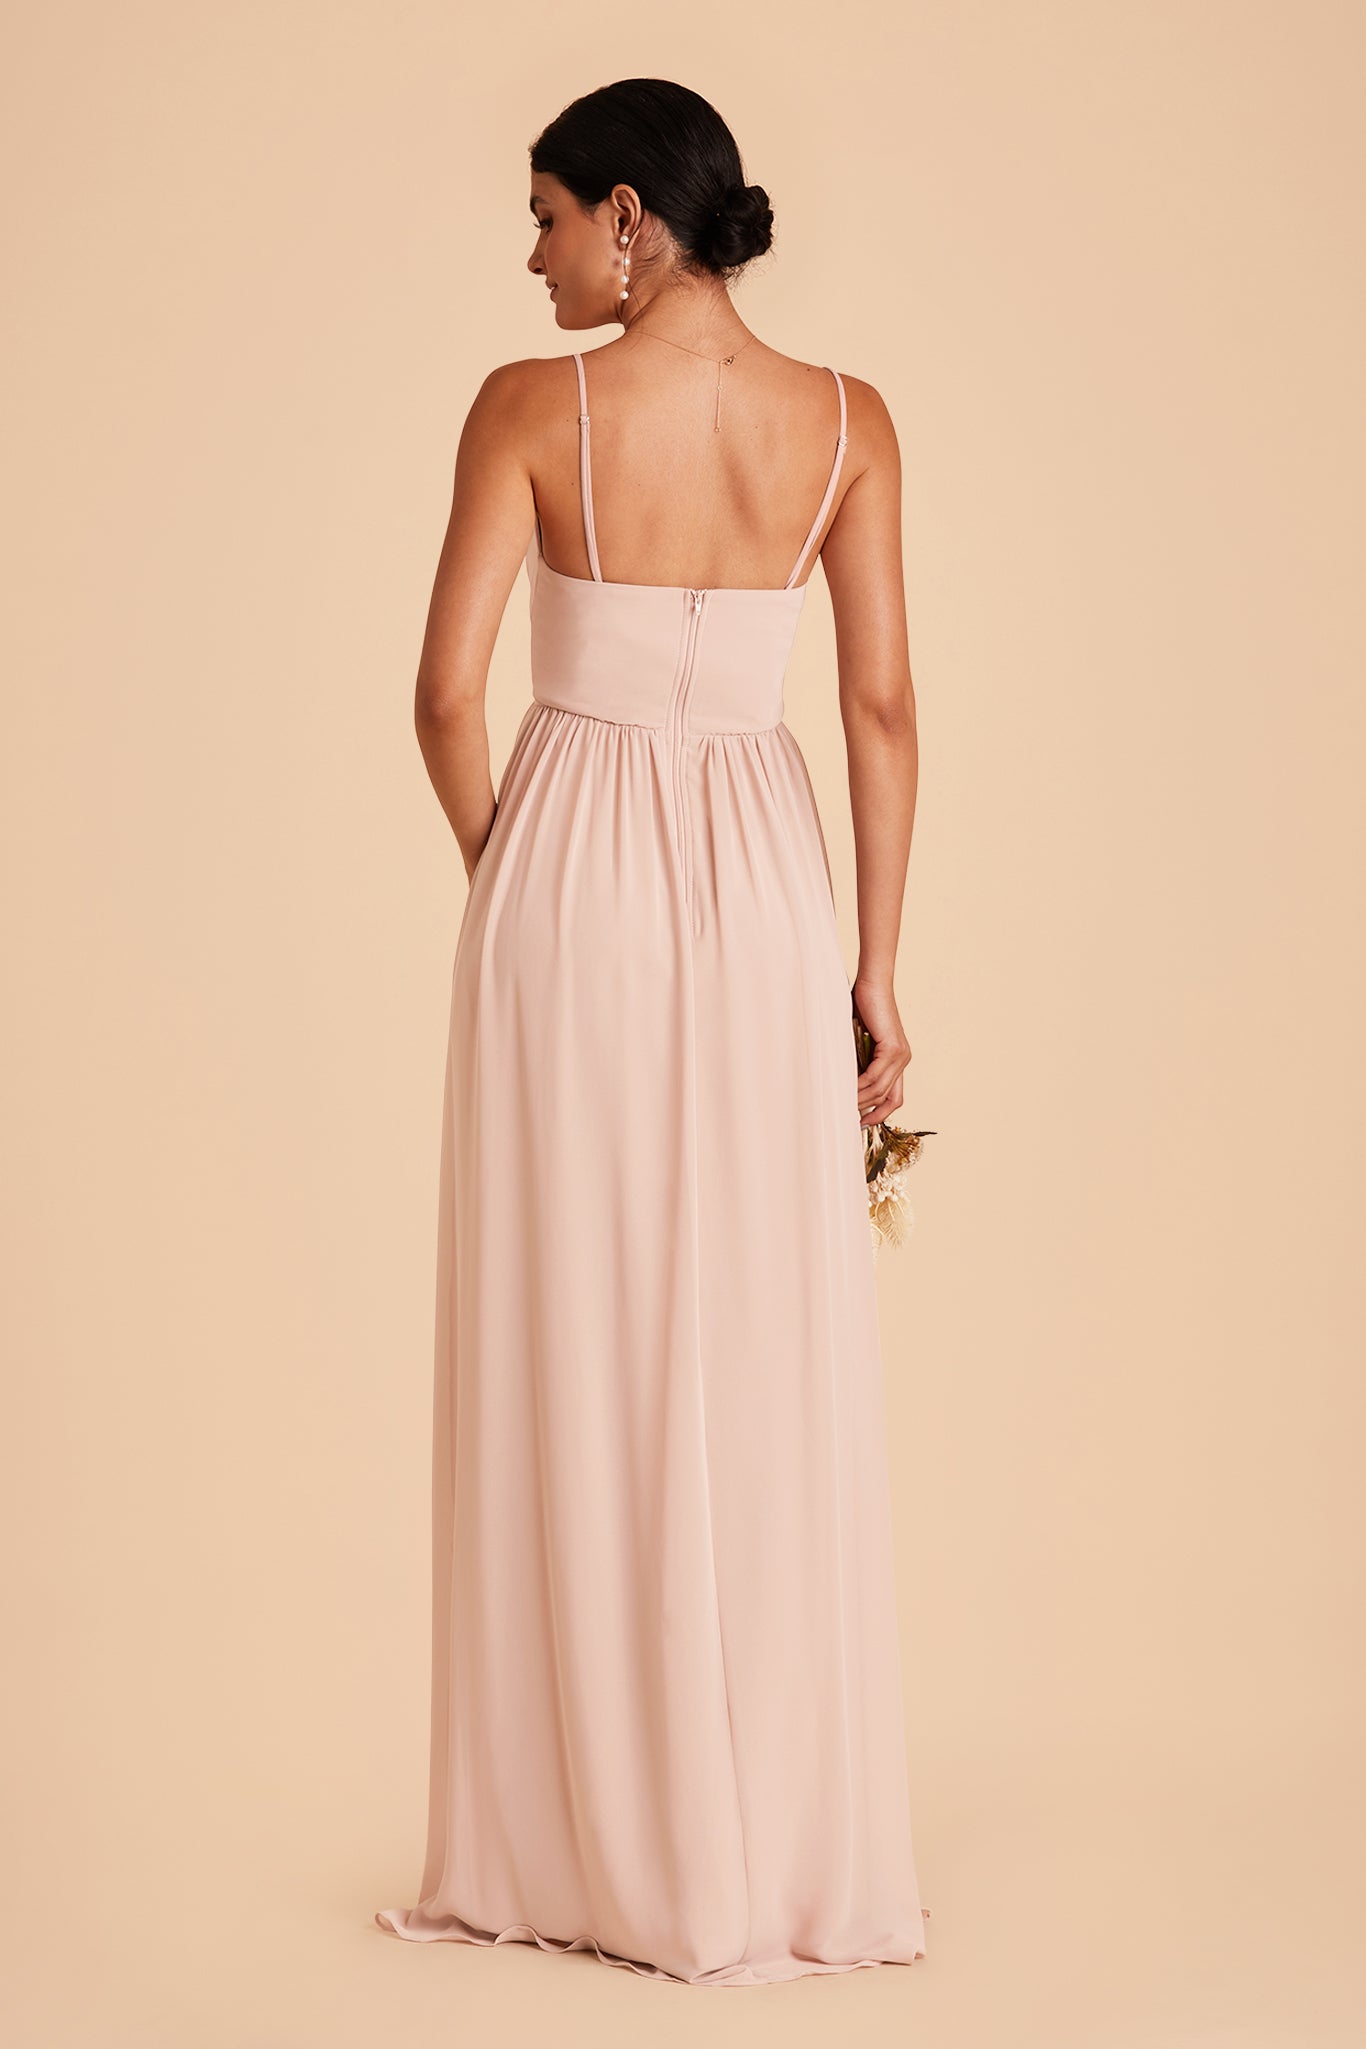 August bridesmaid dress with slit in pale blush chiffon by Birdy Grey, back view